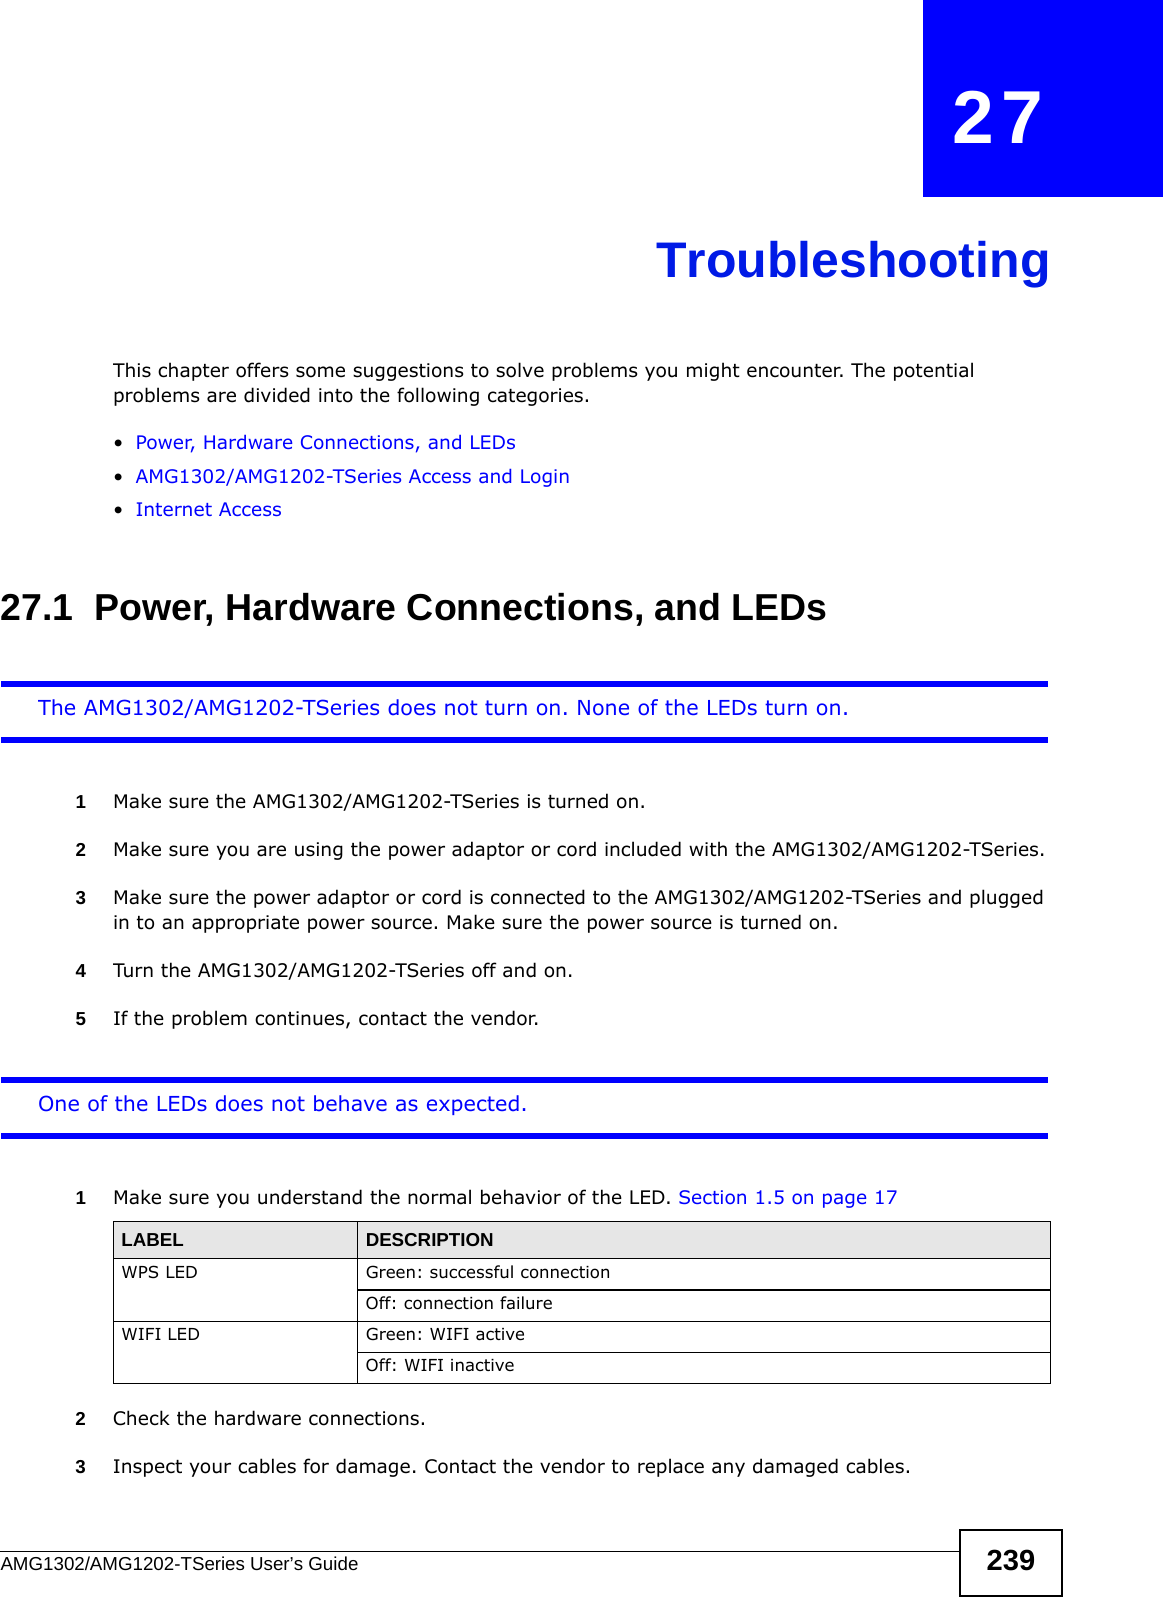 AMG1302/AMG1202-TSeries User’s Guide 239CHAPTER   27TroubleshootingThis chapter offers some suggestions to solve problems you might encounter. The potential problems are divided into the following categories. •Power, Hardware Connections, and LEDs•AMG1302/AMG1202-TSeries Access and Login•Internet Access27.1  Power, Hardware Connections, and LEDsThe AMG1302/AMG1202-TSeries does not turn on. None of the LEDs turn on.1Make sure the AMG1302/AMG1202-TSeries is turned on. 2Make sure you are using the power adaptor or cord included with the AMG1302/AMG1202-TSeries.3Make sure the power adaptor or cord is connected to the AMG1302/AMG1202-TSeries and plugged in to an appropriate power source. Make sure the power source is turned on.4Turn the AMG1302/AMG1202-TSeries off and on.5If the problem continues, contact the vendor.One of the LEDs does not behave as expected.1Make sure you understand the normal behavior of the LED. Section 1.5 on page 172Check the hardware connections.3Inspect your cables for damage. Contact the vendor to replace any damaged cables.LABEL DESCRIPTIONWPS LED Green: successful connectionOff: connection failureWIFI LED Green: WIFI activeOff: WIFI inactive